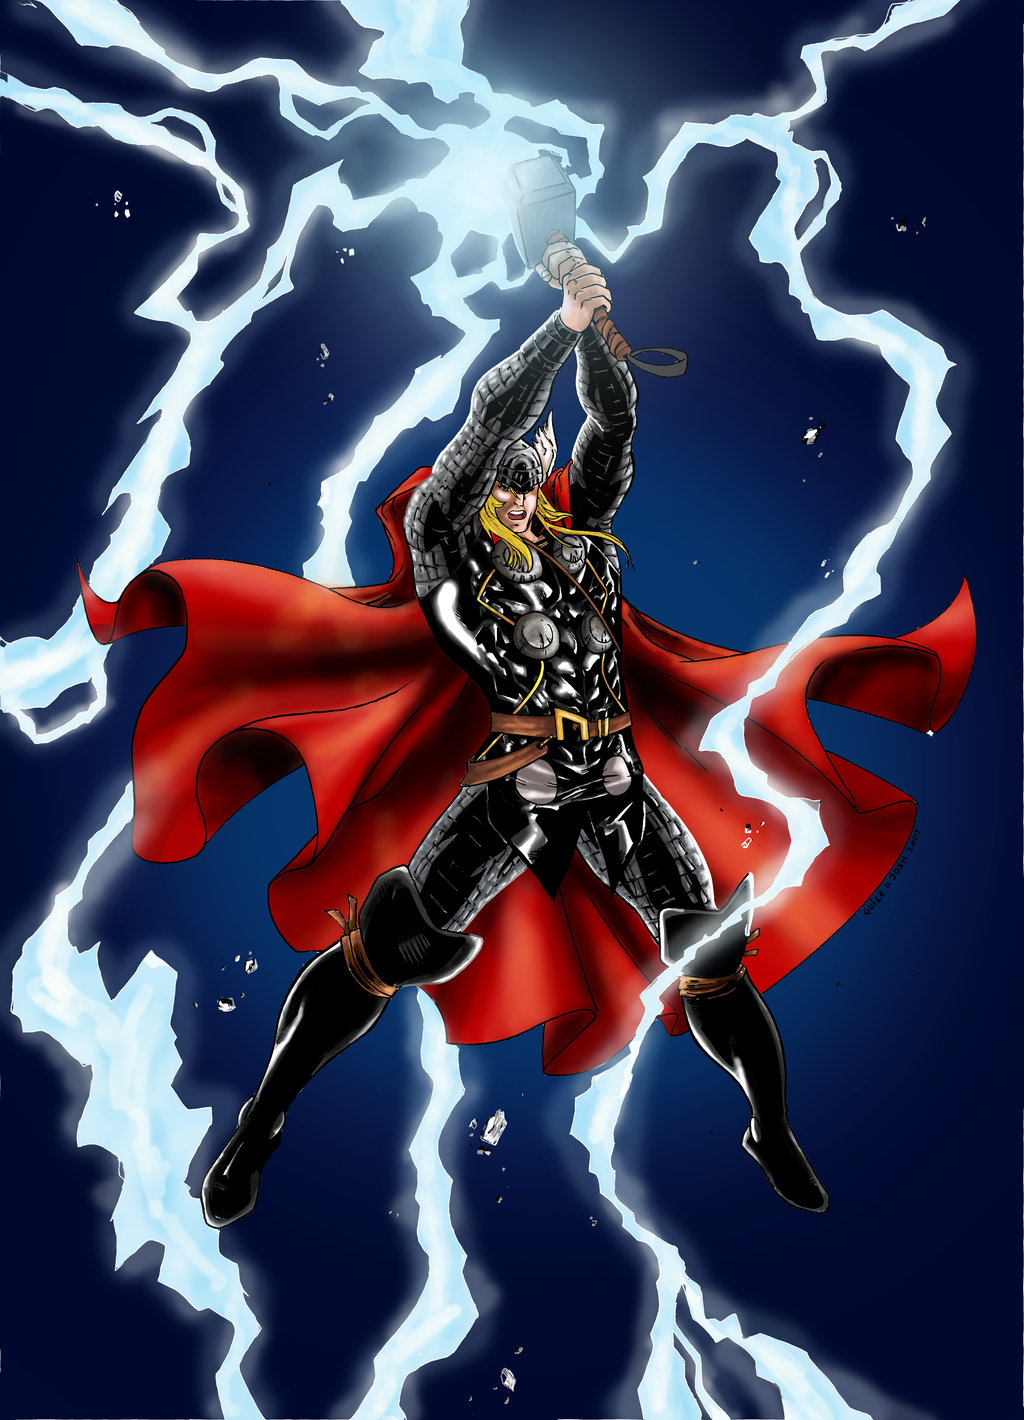 Thor_wrath_by_night_by_spiderguile.jpg